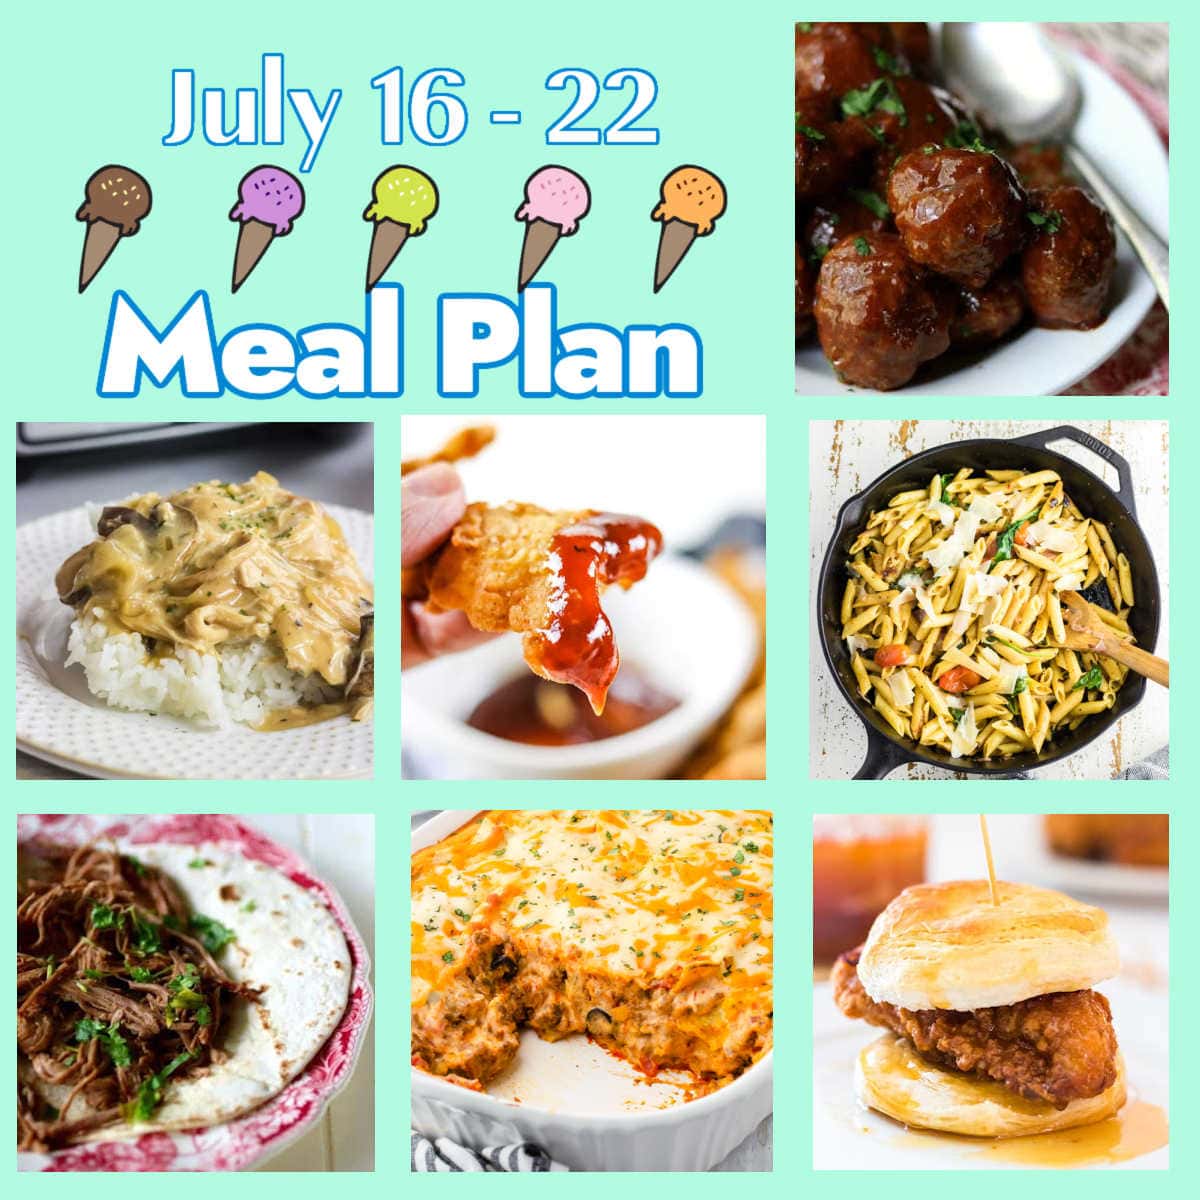 Collage of images for July 16 through 22 meal plan.